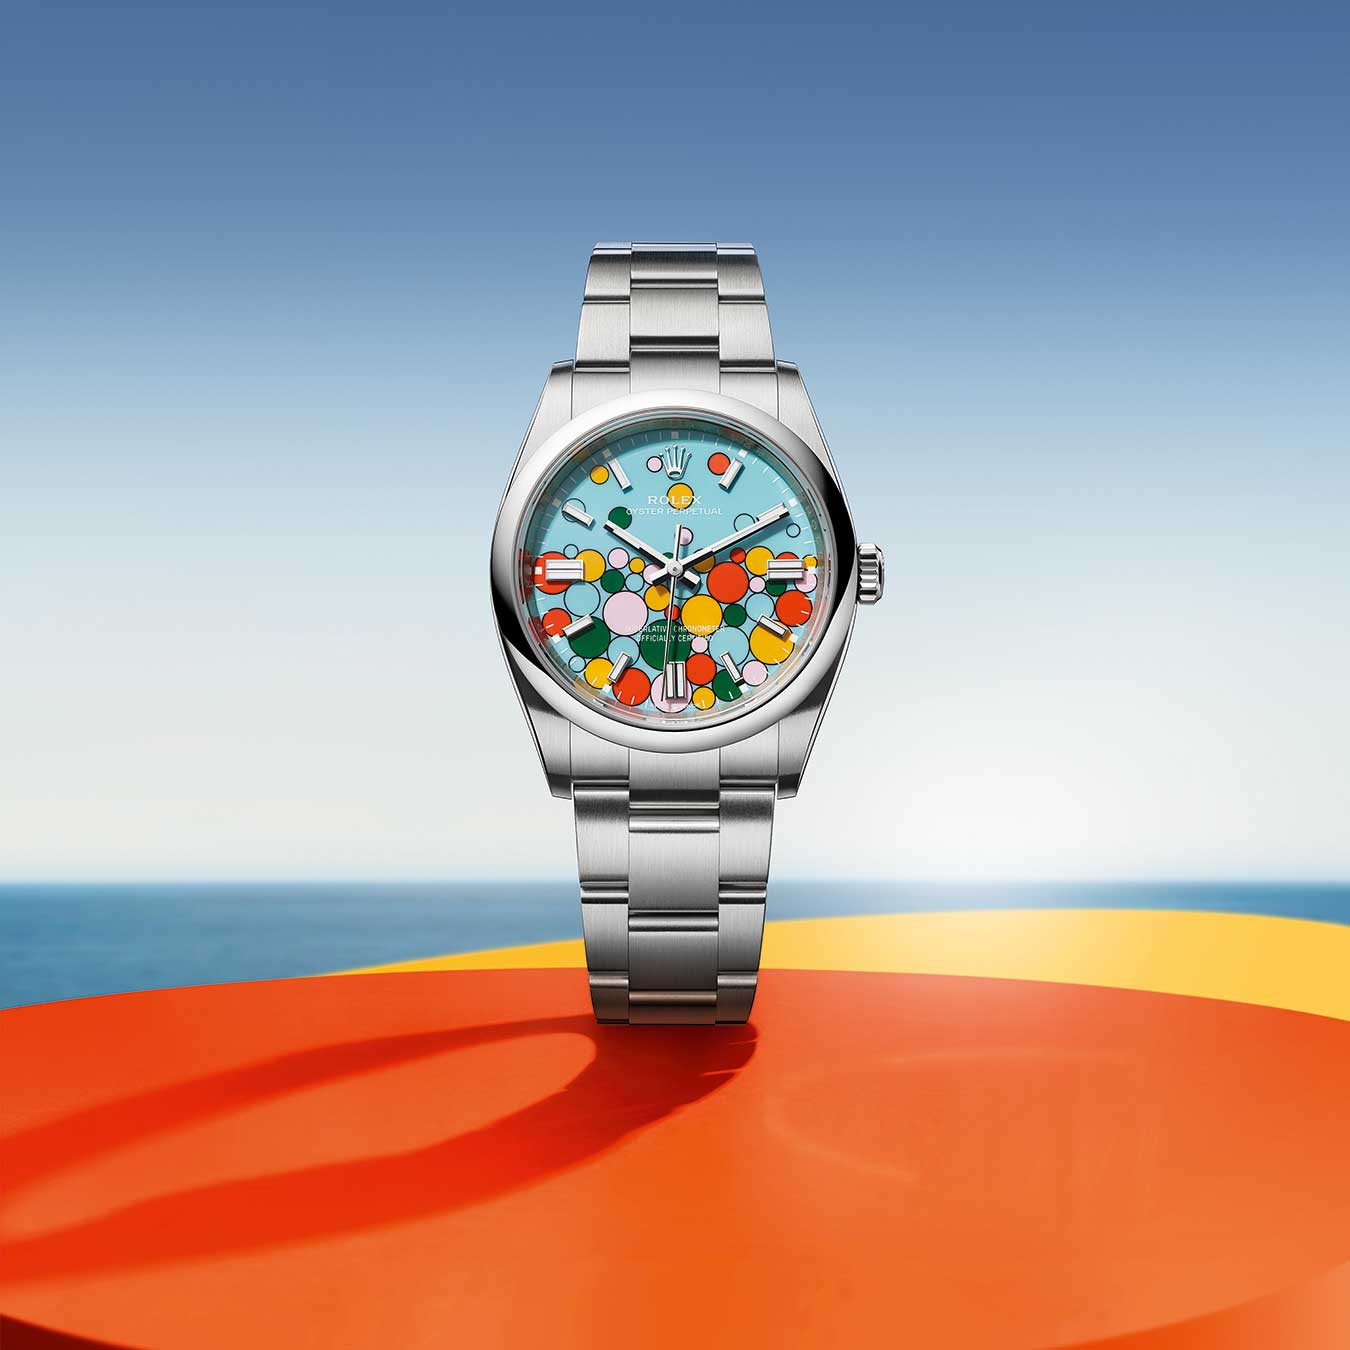 Oyster Perpetual with a New Lacquered Dial in Celebration Motif